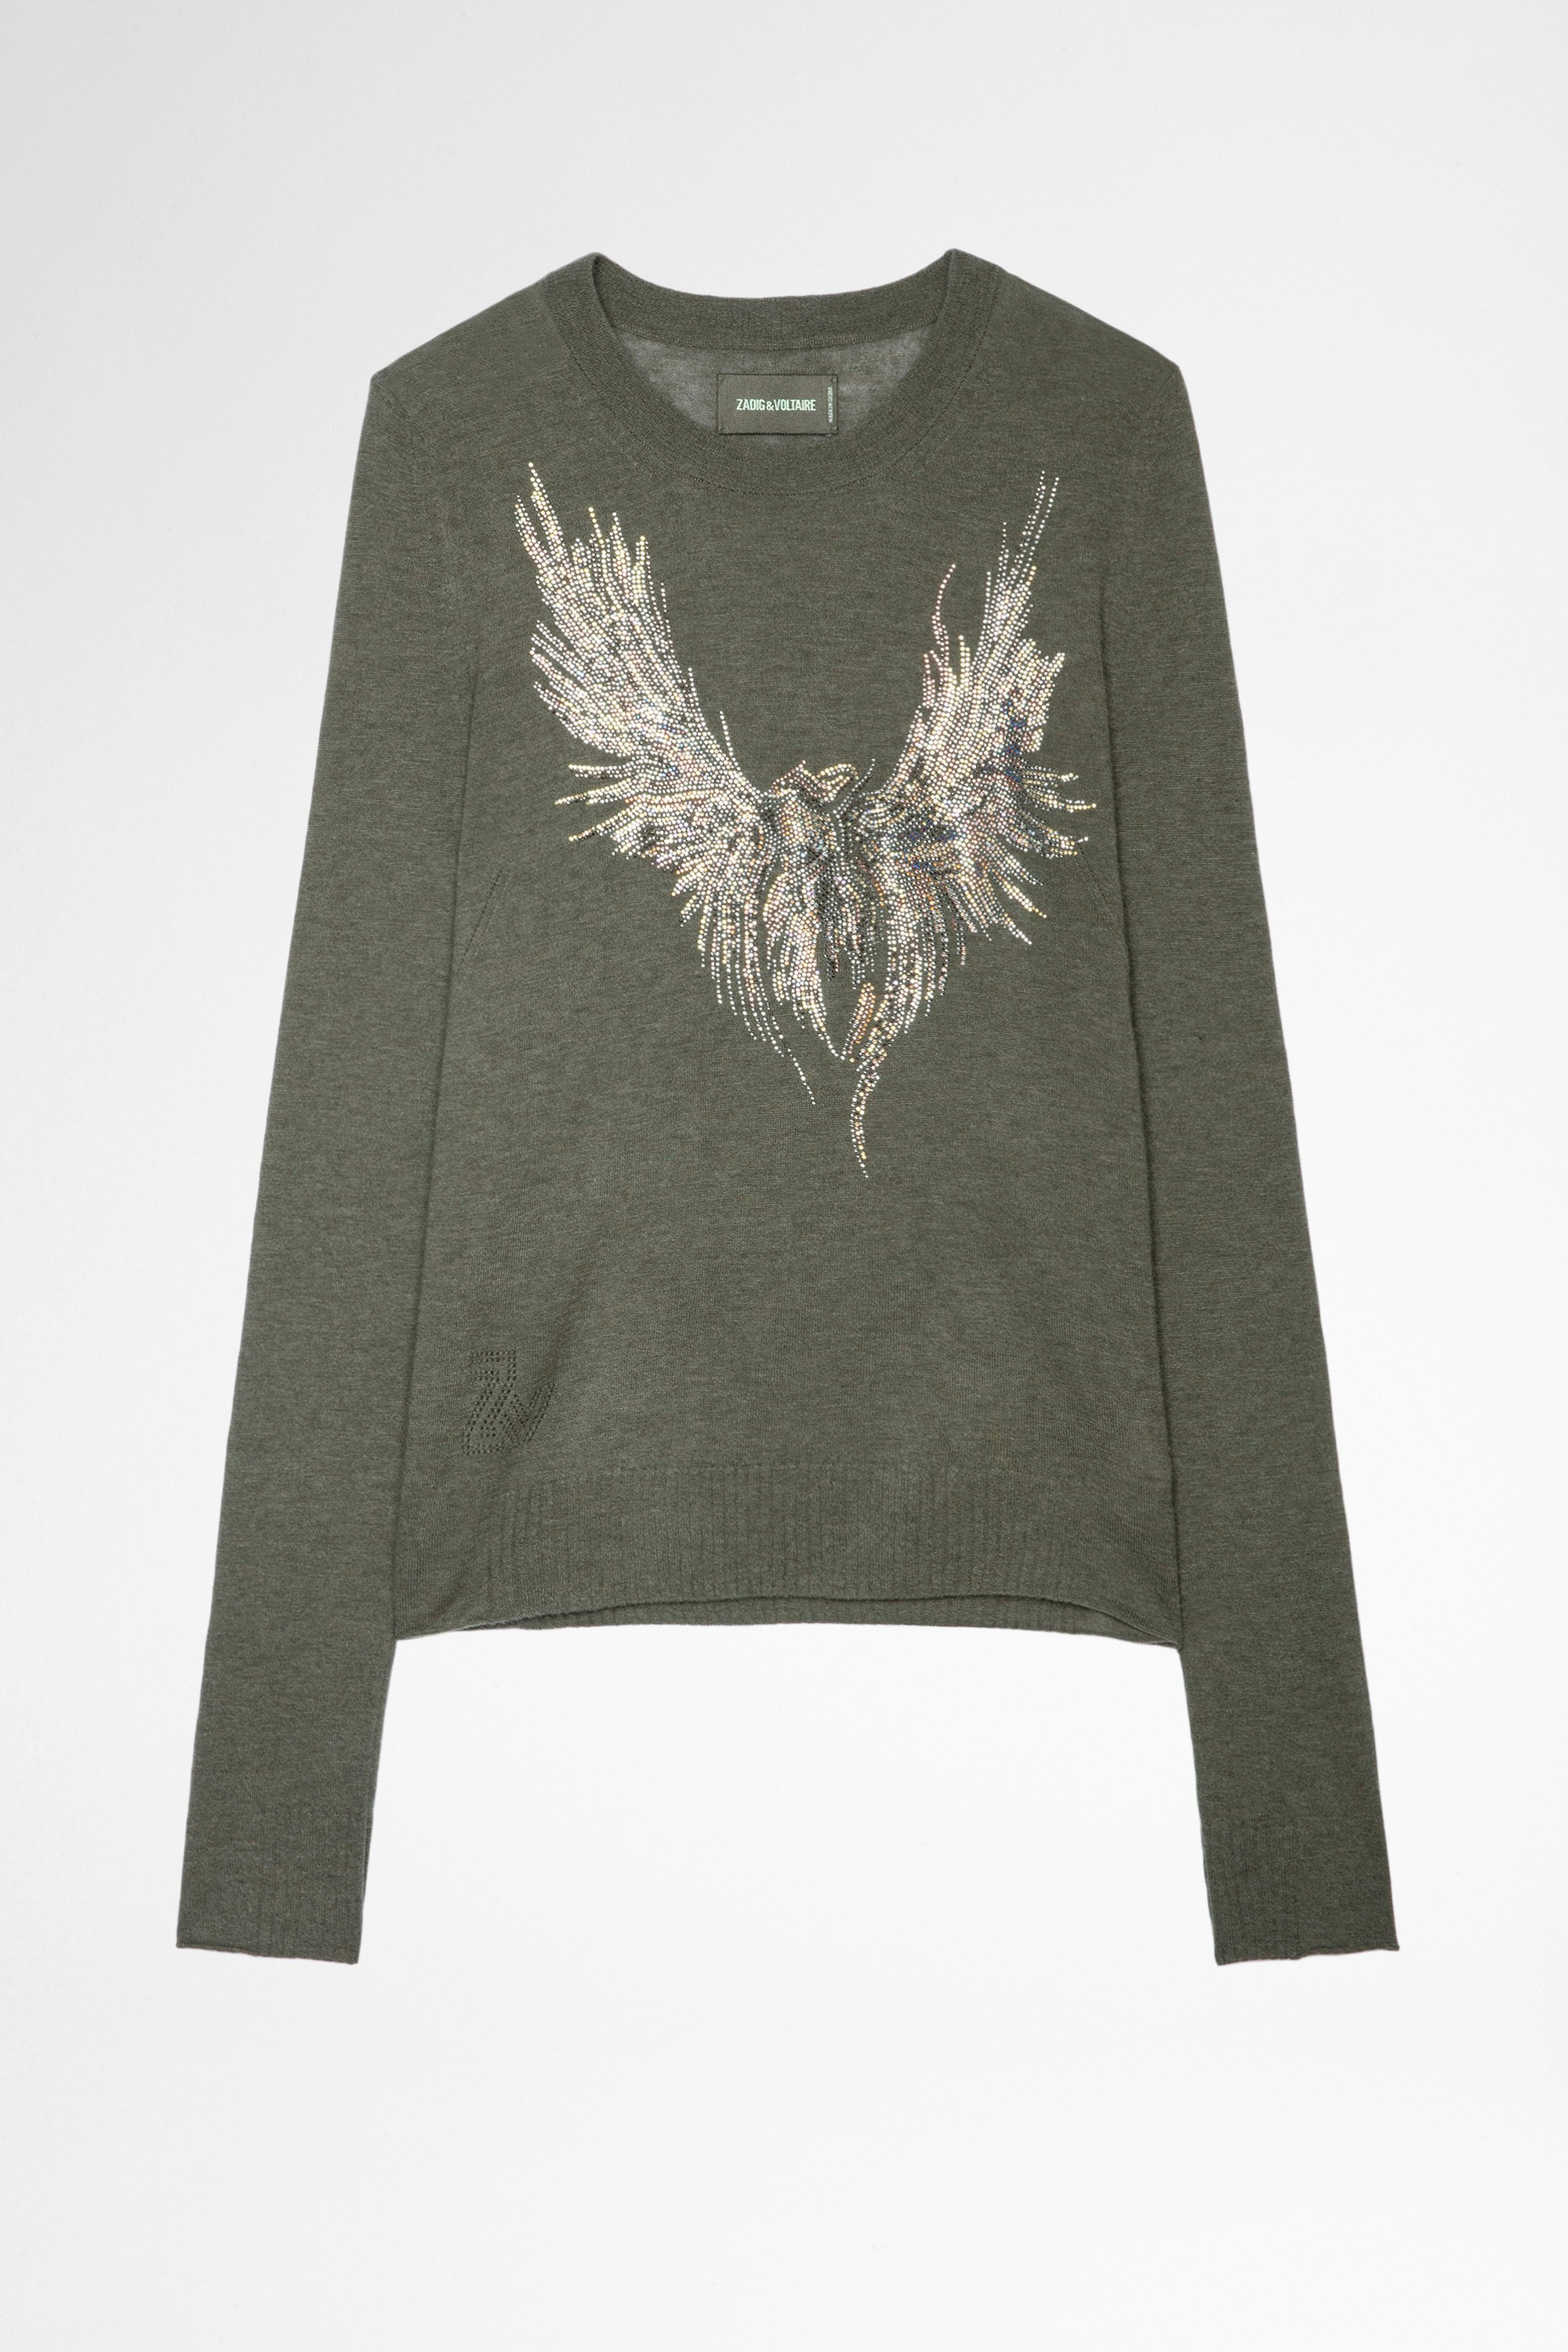 Miss カシミヤ ニット Women's khaki cashmere jumper with crystal wings